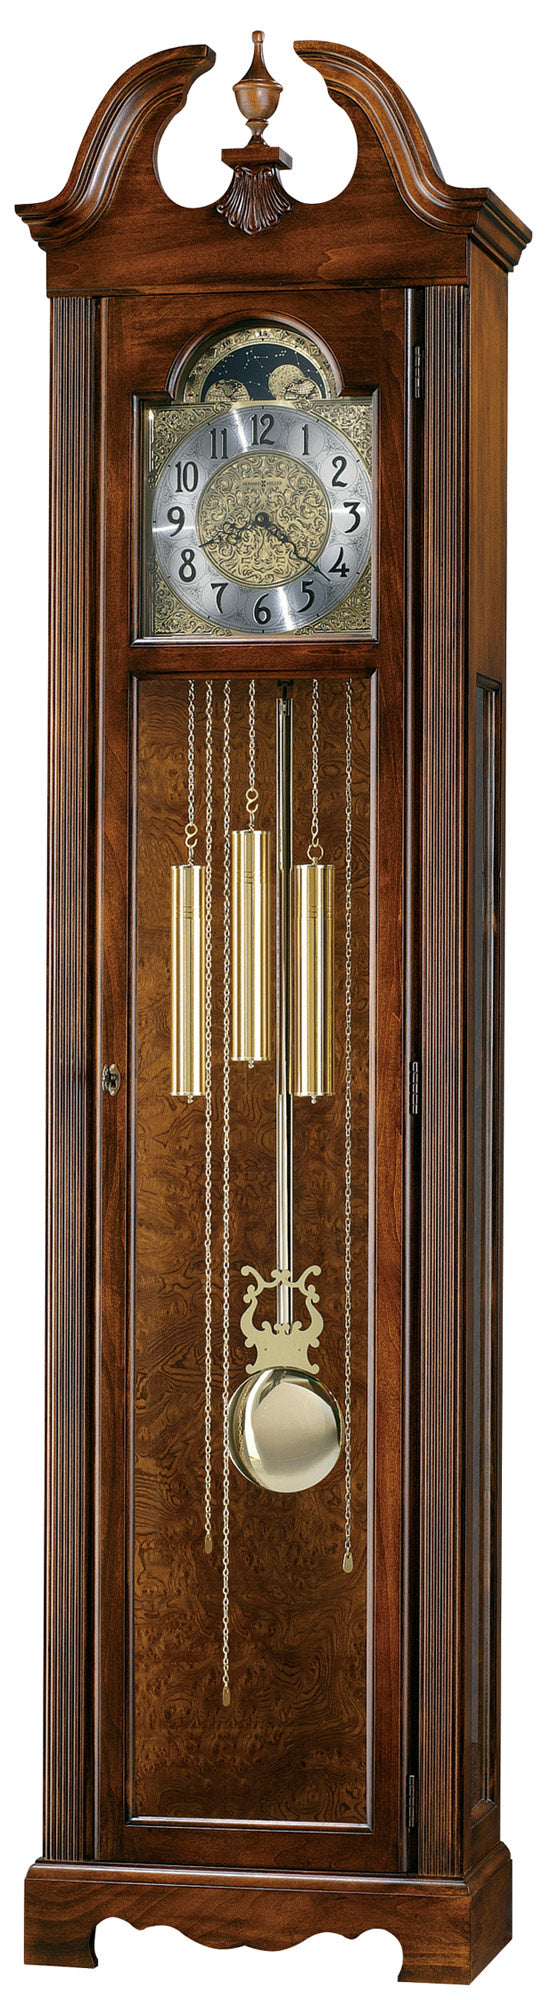 Princeton Grandfather Clock by Howard Miller